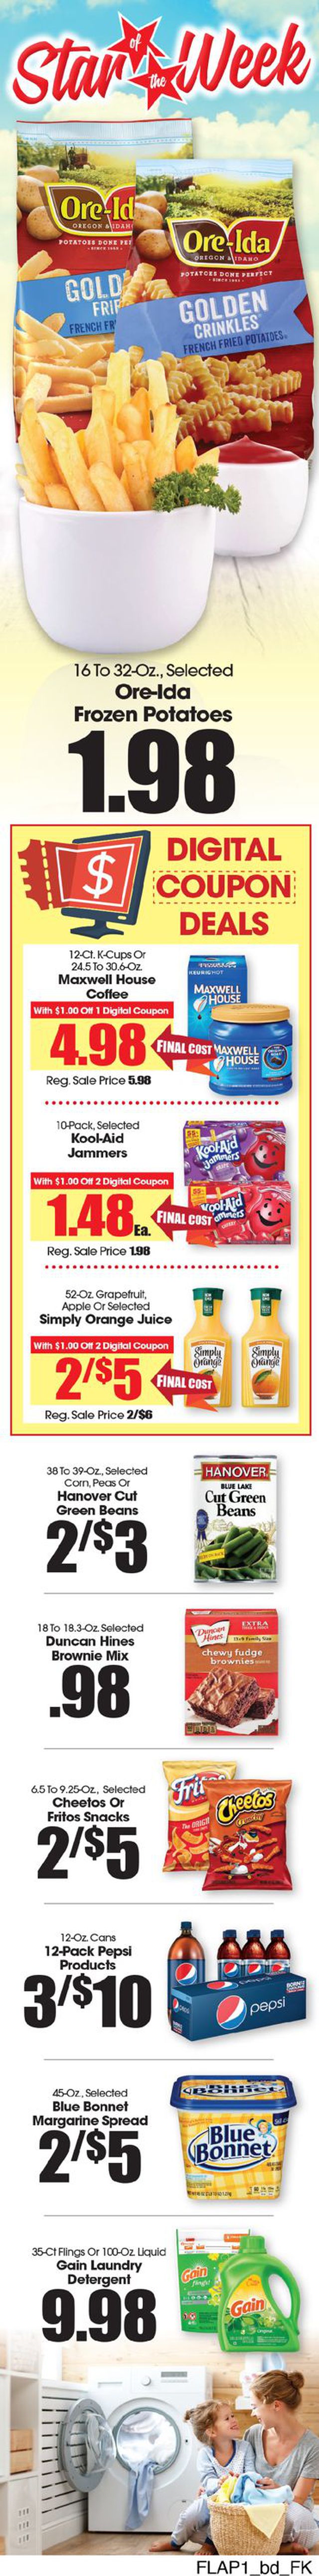 Food King Ad from 09/09/2020